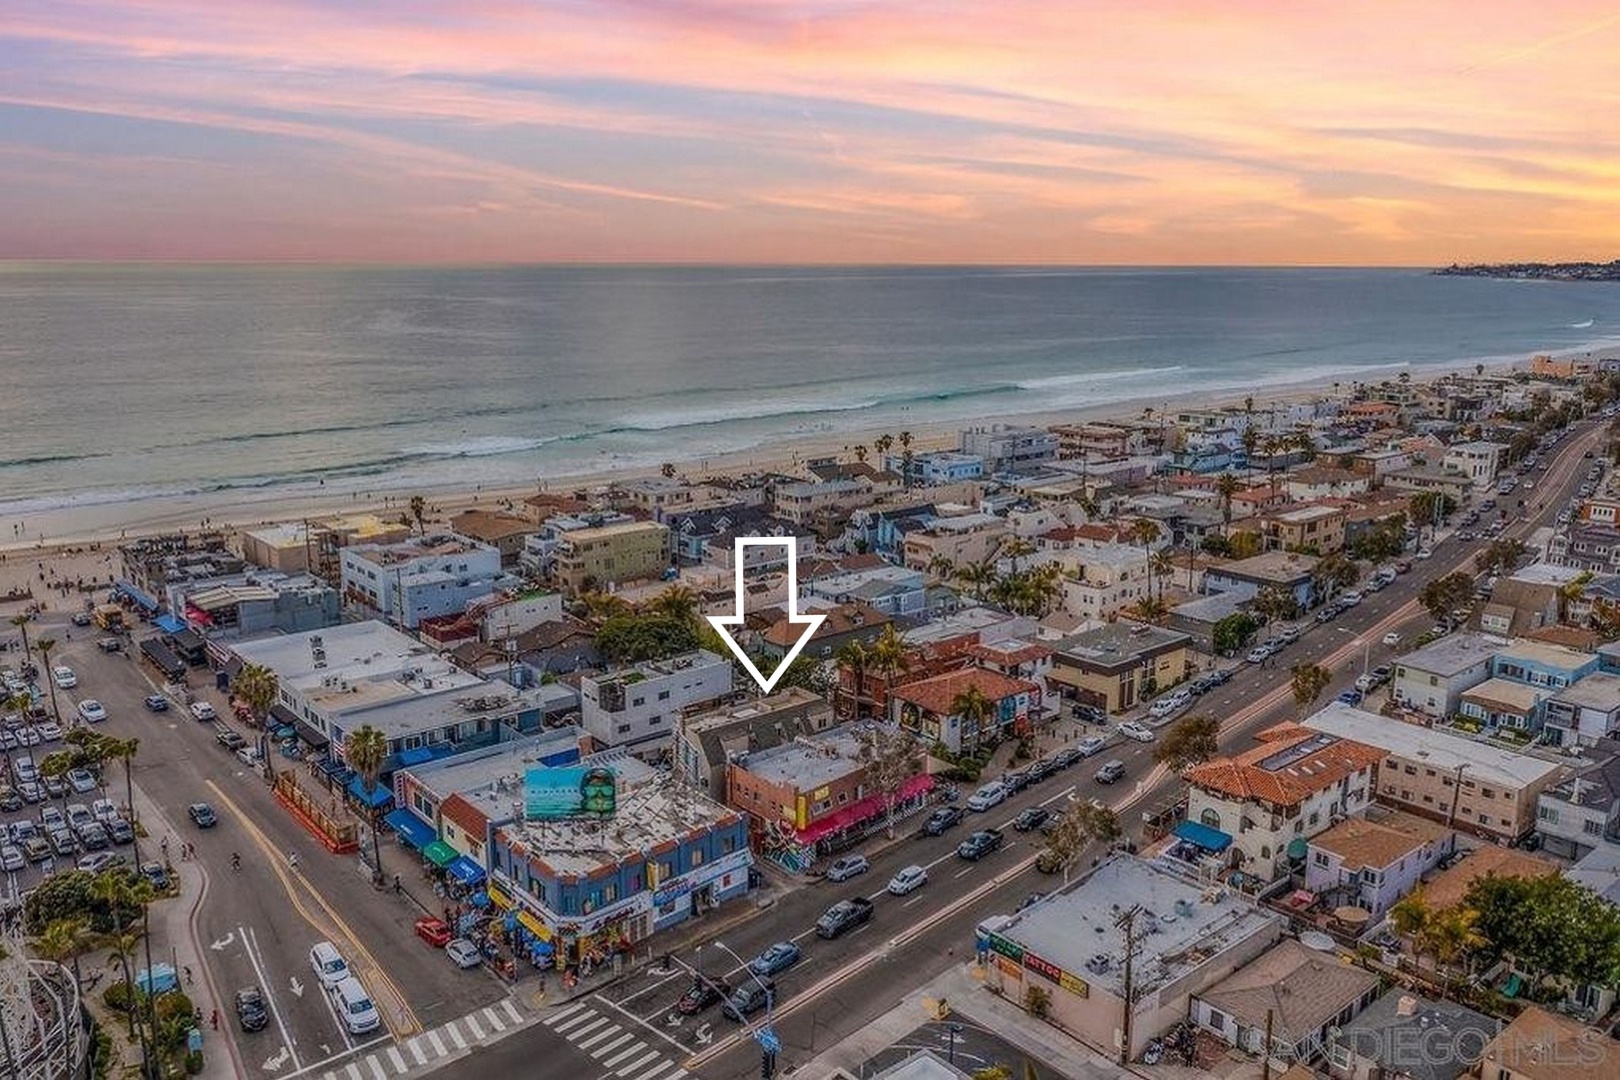 South Mission Beach location